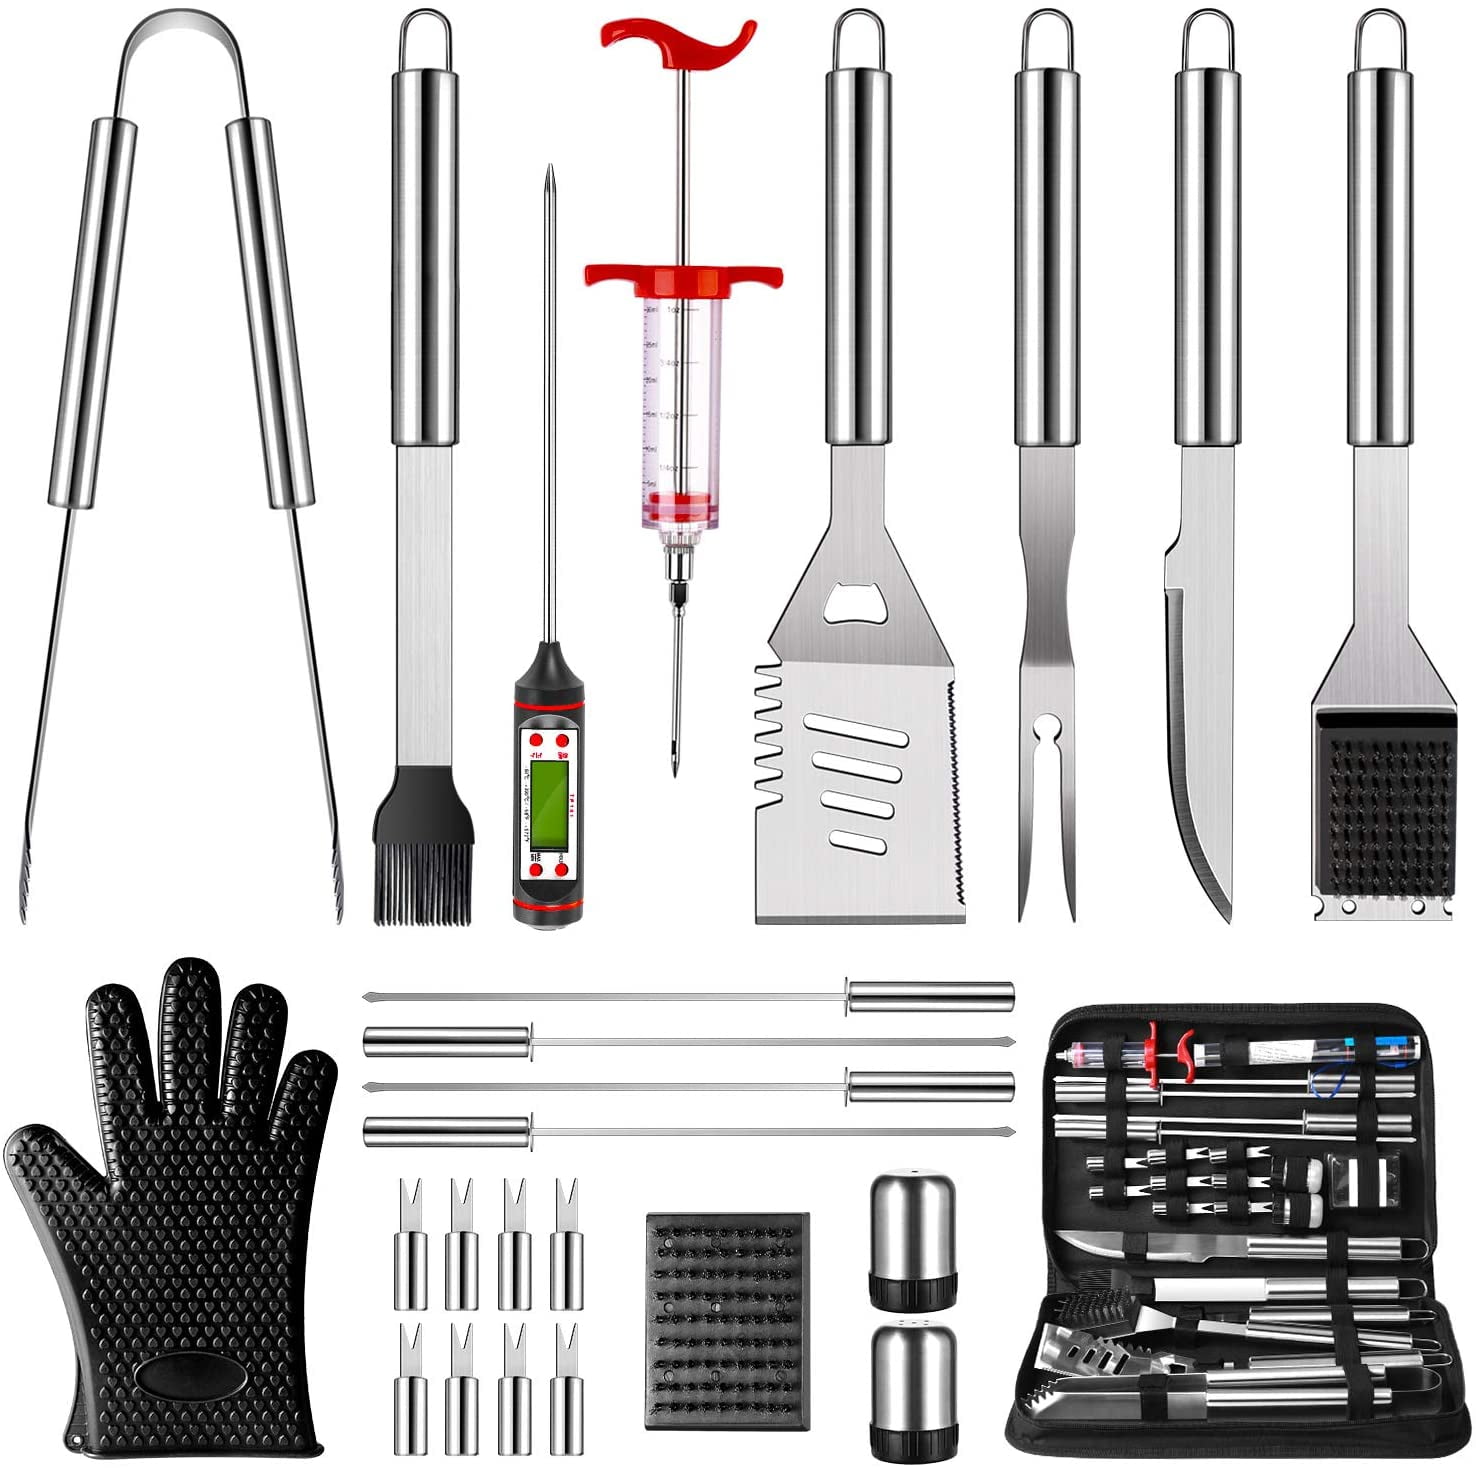 OlarHike BBQ Accessories Grill Tools Set, 25PCS Stainless Steel Grilling Kit for Smoker, Camping, Barbecue Utensil for Men Women with Thermometer and Meat Injector - Walmart.com